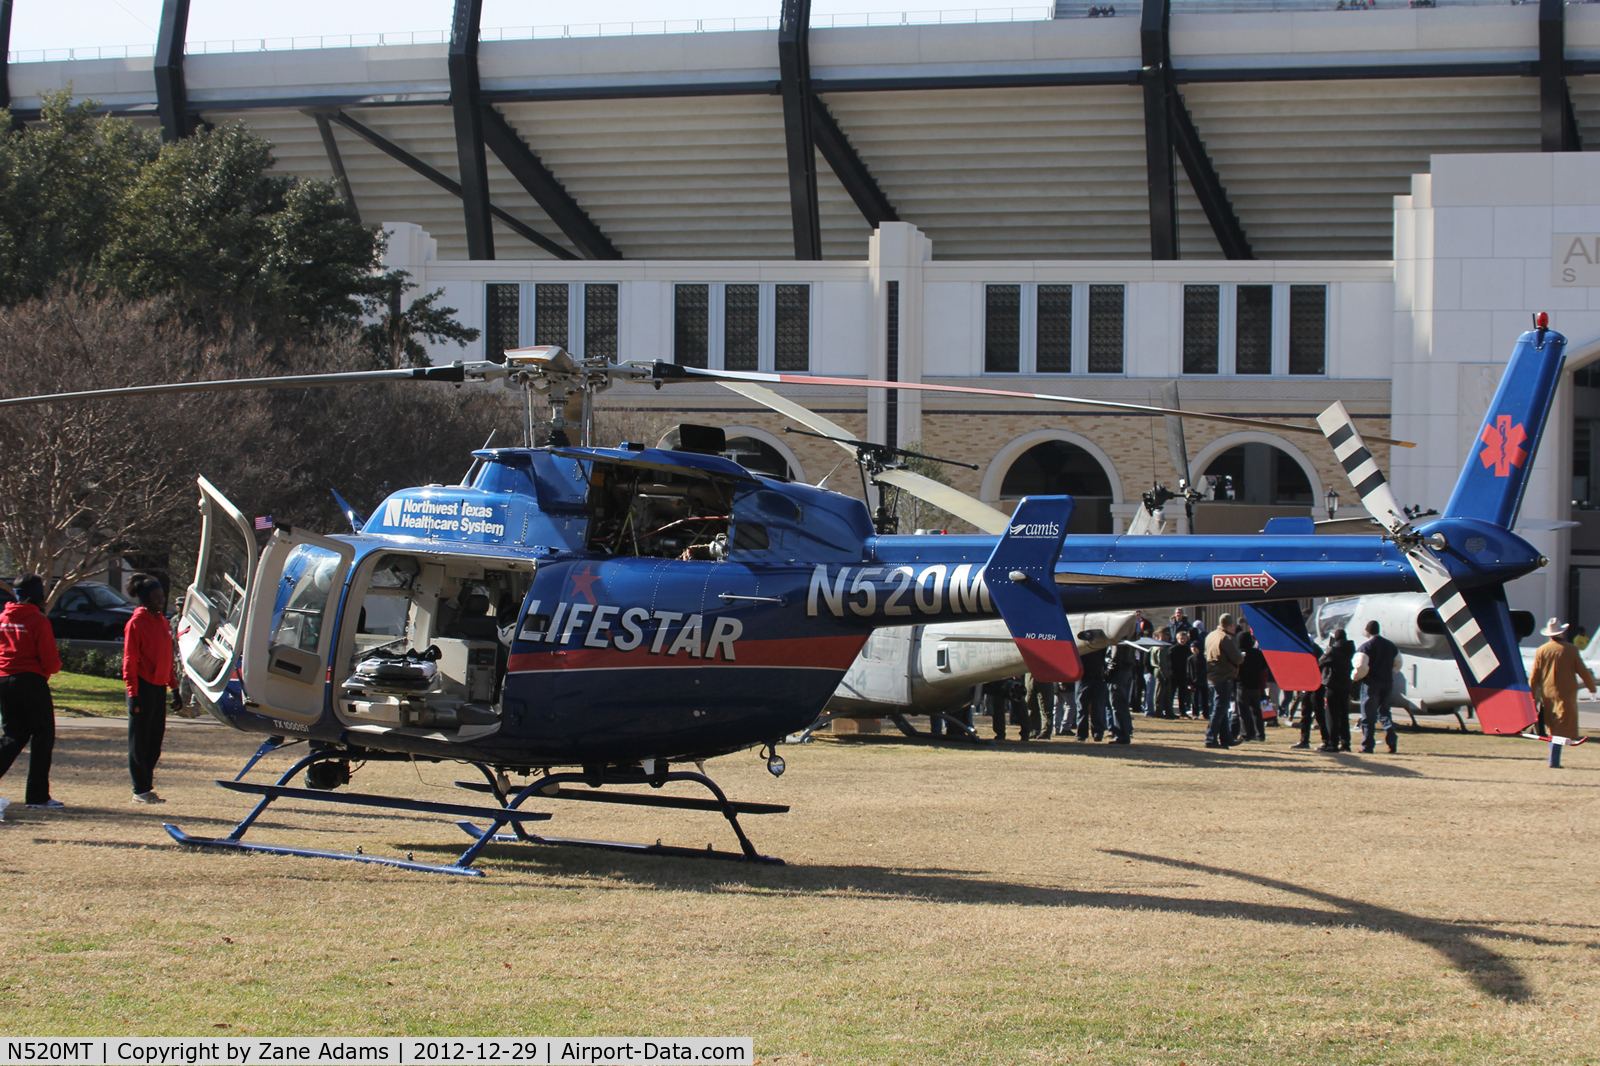 N520MT, 2007 Bell 407 C/N 53805, On display at the 2013 Armed Forces Bowl in Fort Worth, TX